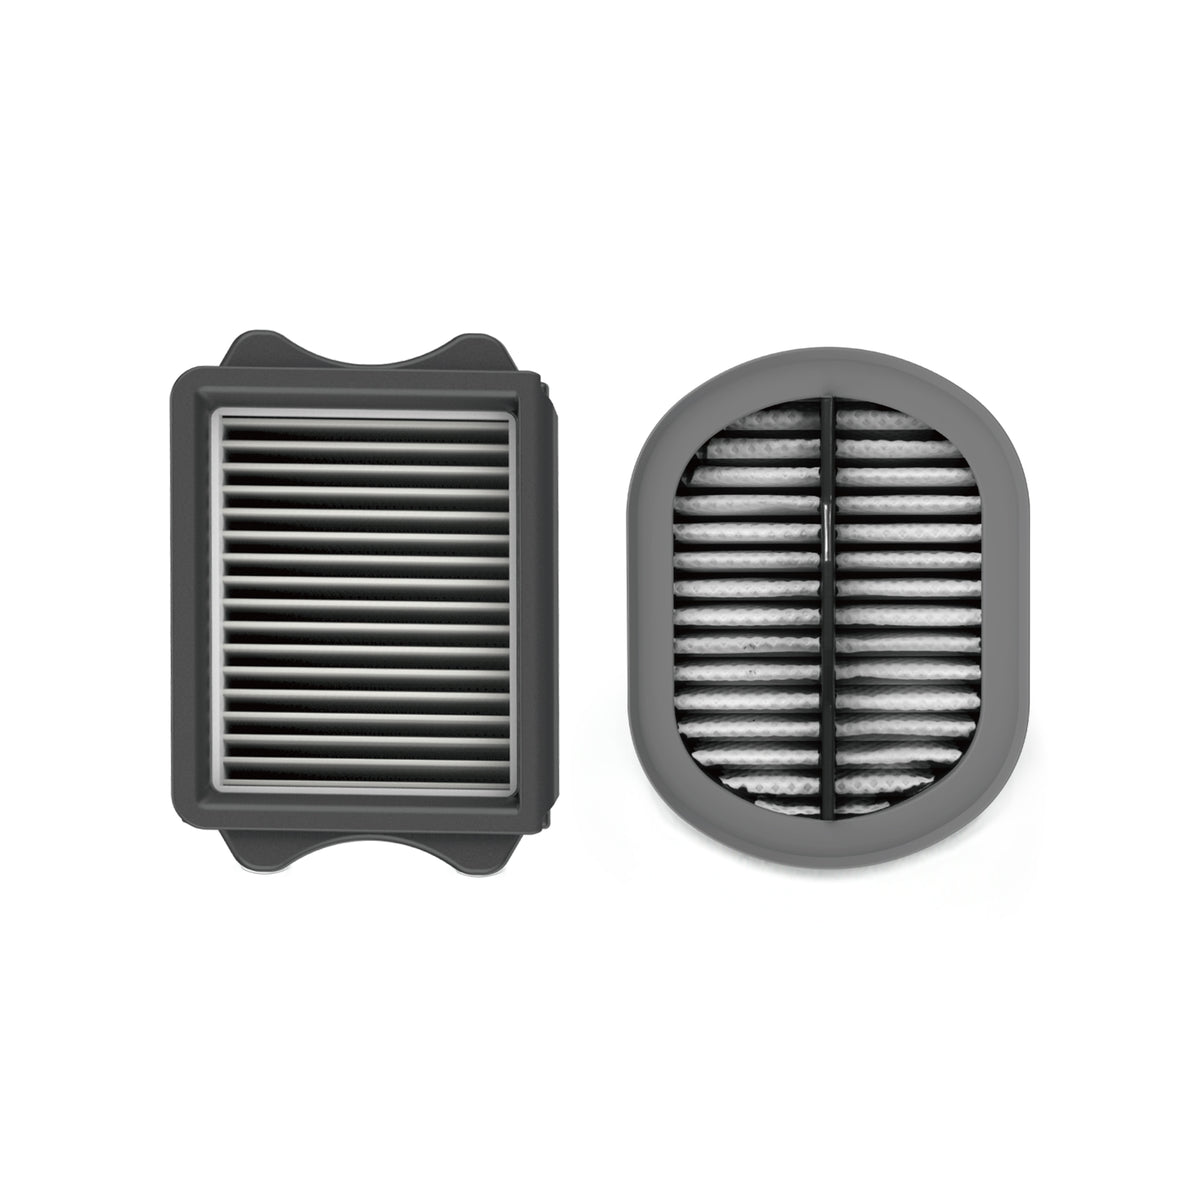  S5 Roller Brush and HEPA Vacuum Filter Replacement for Tineco  Floor ONE S5 / S5 Pro / S5 Pro 2 / S5 Blue Cordless Wet Dry Vacuum Cleaner  Replacement Parts Include